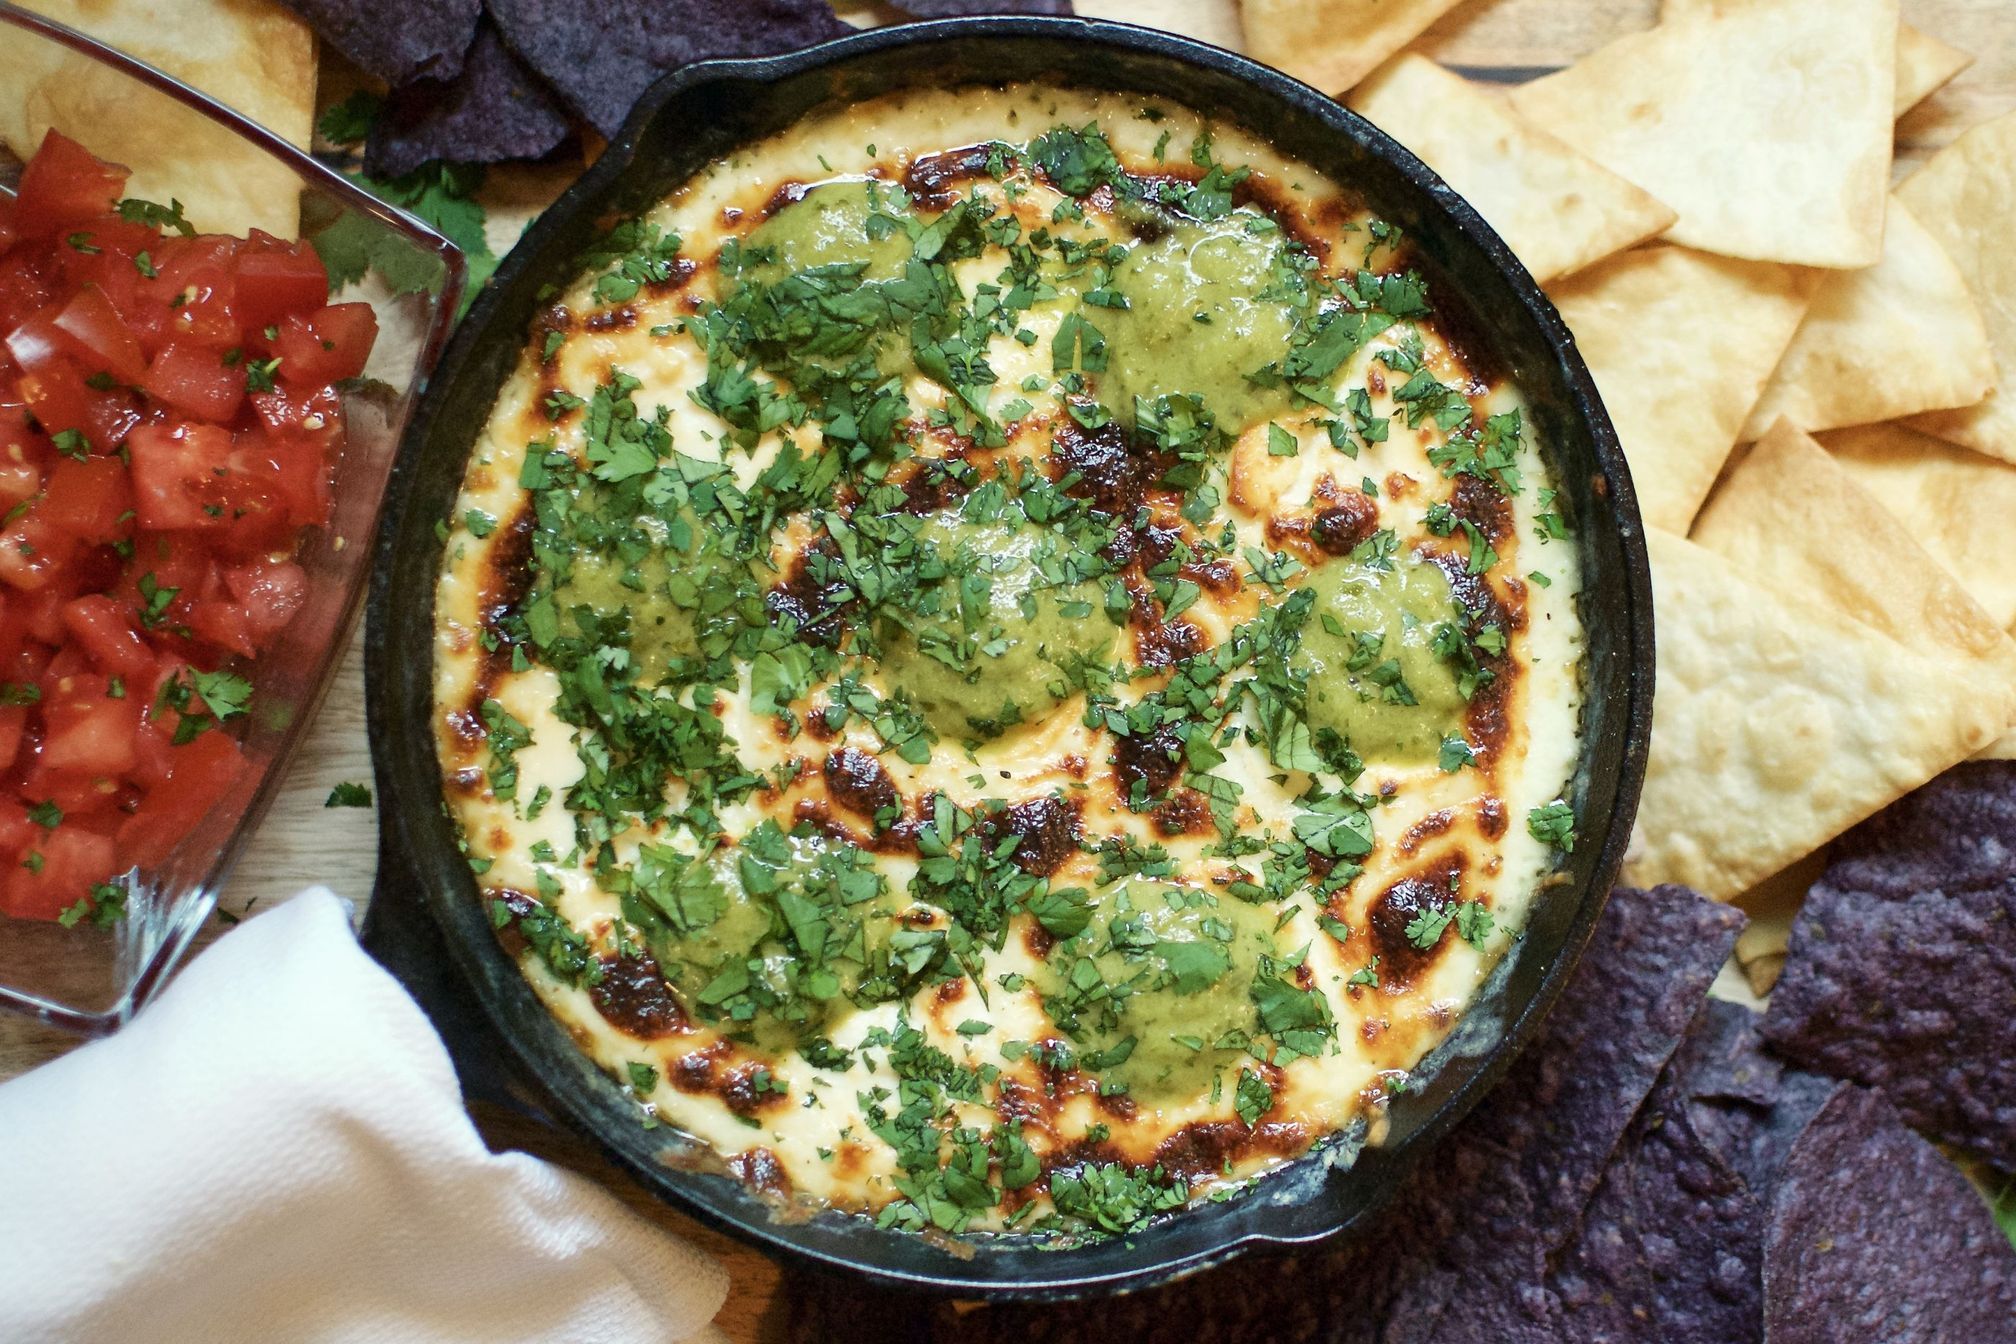 Best Queso Fundido Recipe - How To Make Bobby Flay's Queso